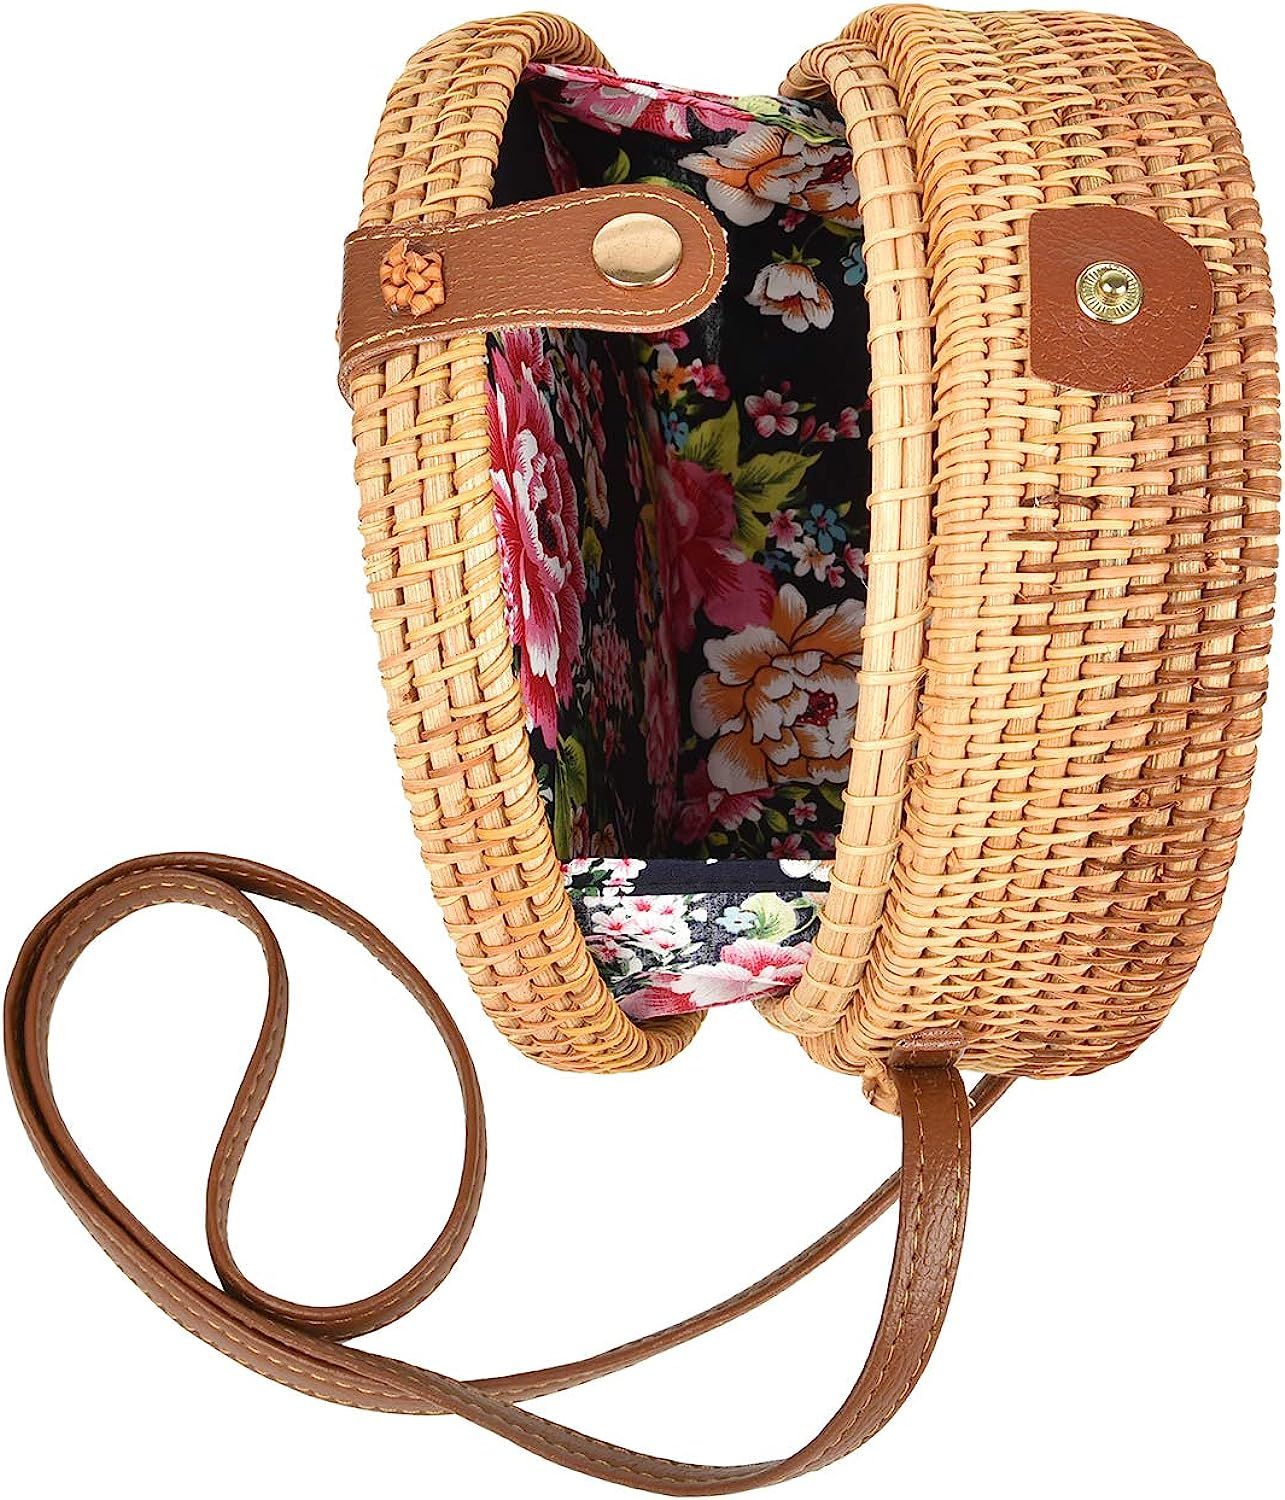 Handwoven Round Rattan Bag Tropical Beach Style Woven Shoulder Rattan Bag with Leather Strap | Amazon (US)